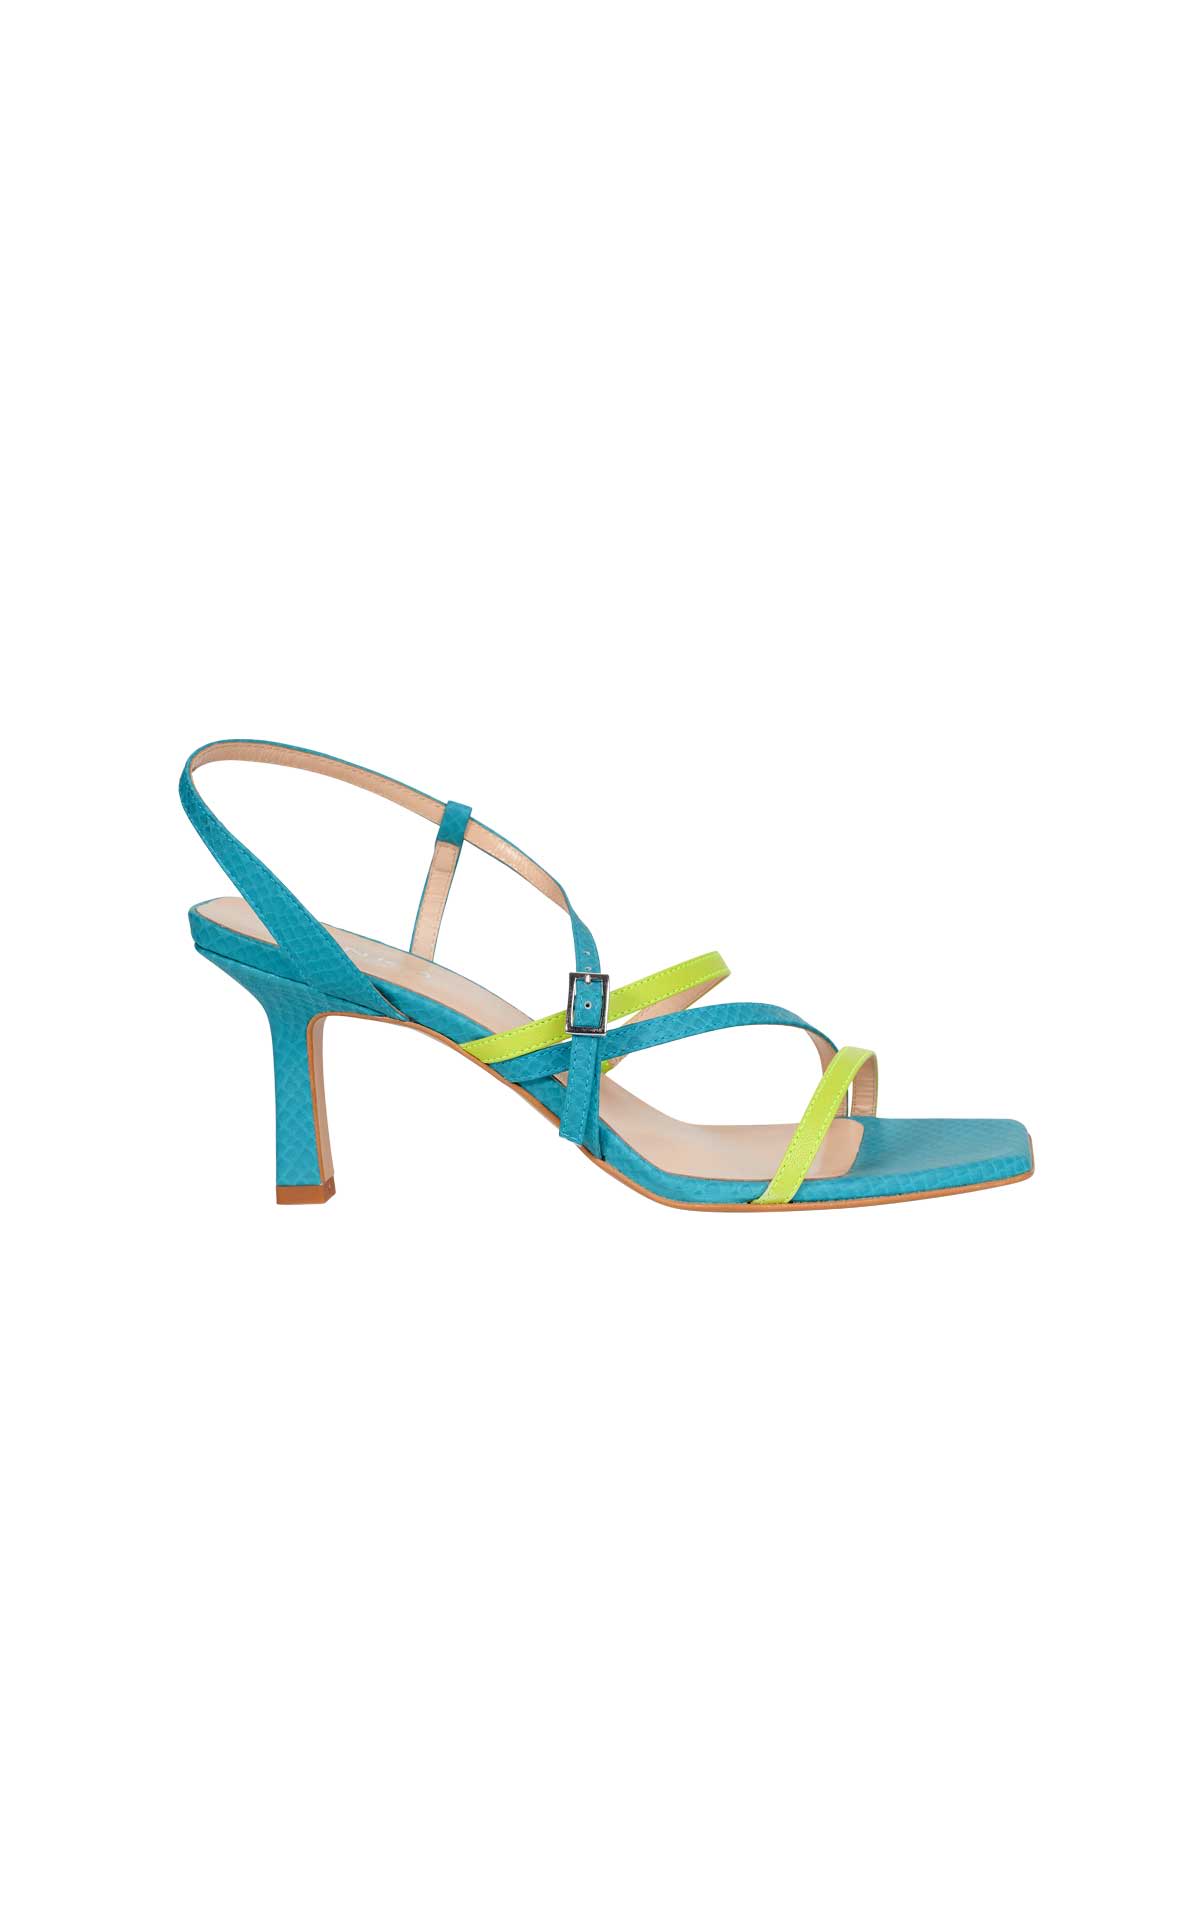 Blue and green sandal with stiletto heel PINKO